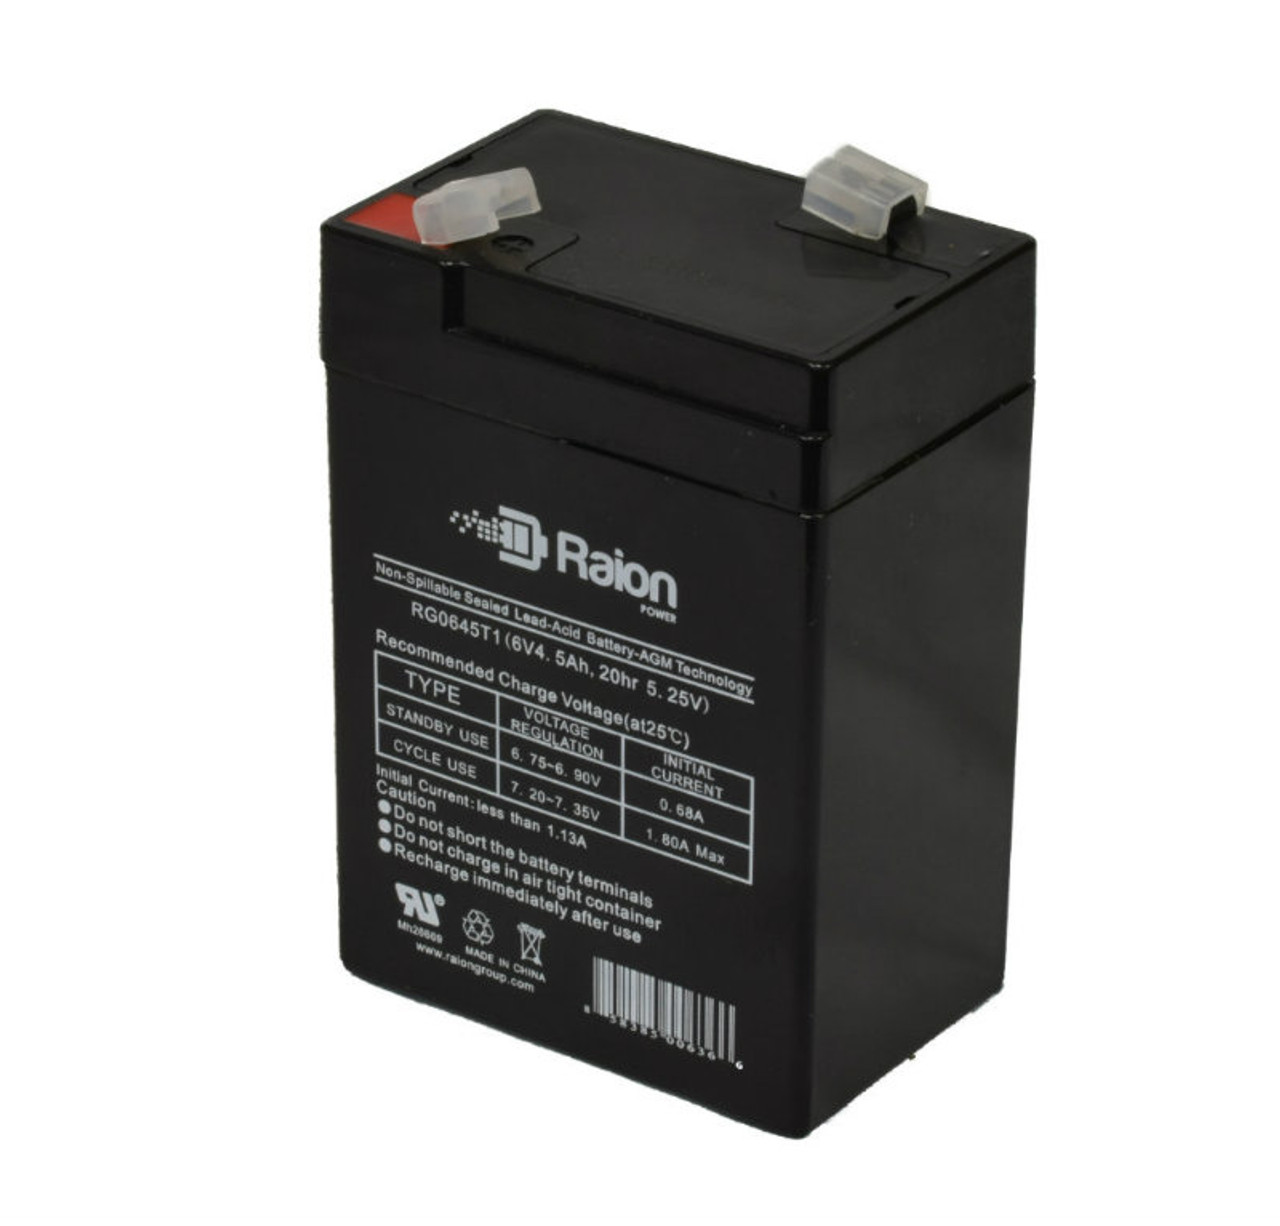 Raion Power RG0645T1 6V 4.5Ah Replacement Battery Cartridge for FIFUTEC FP640